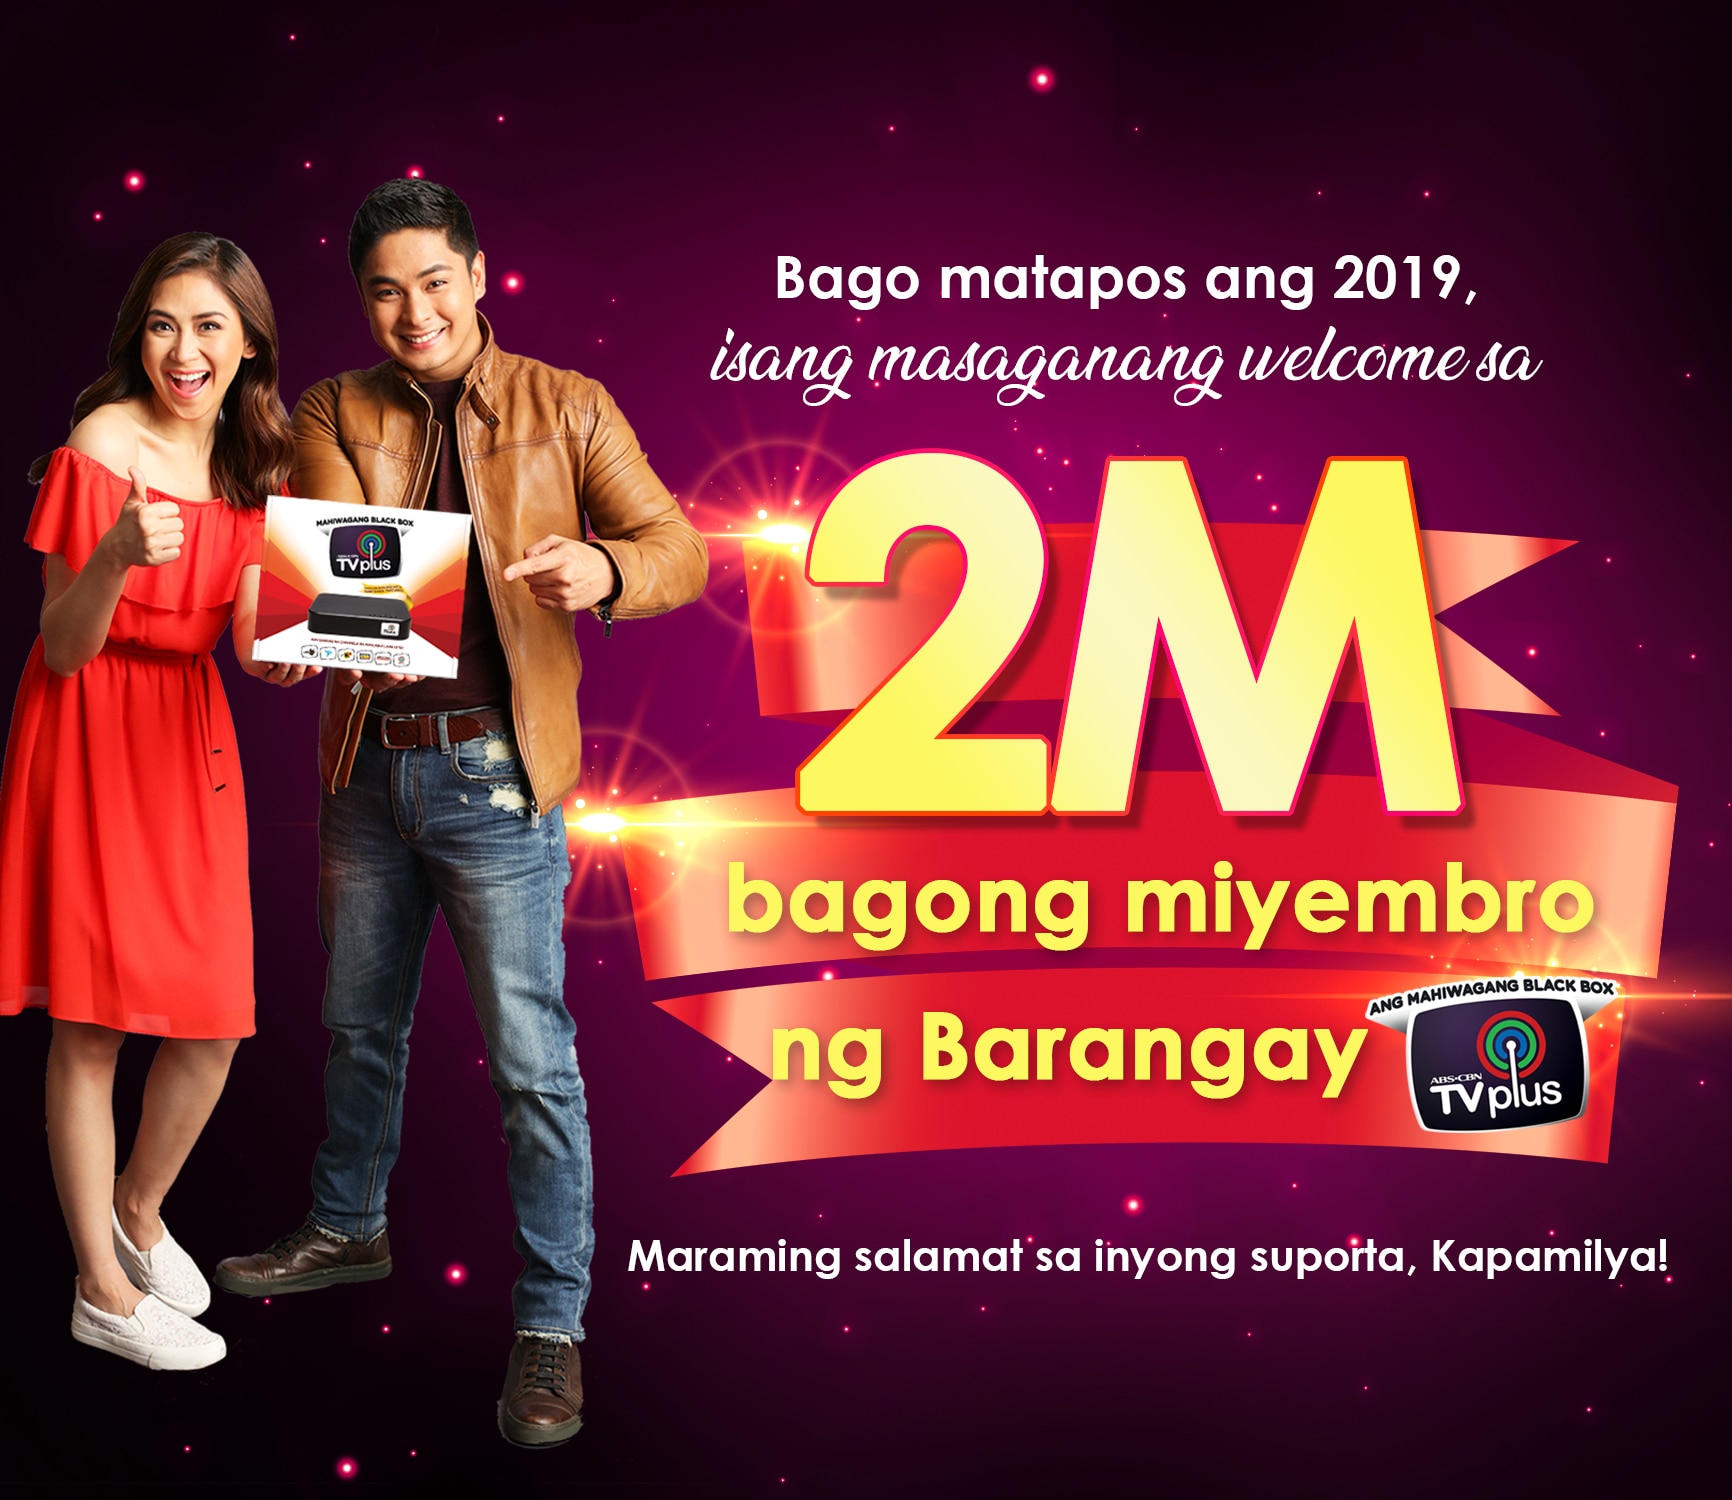 More Filipinos experience clearer TV viewing as ABS-CBN TVPlus sales hit 8.9 million